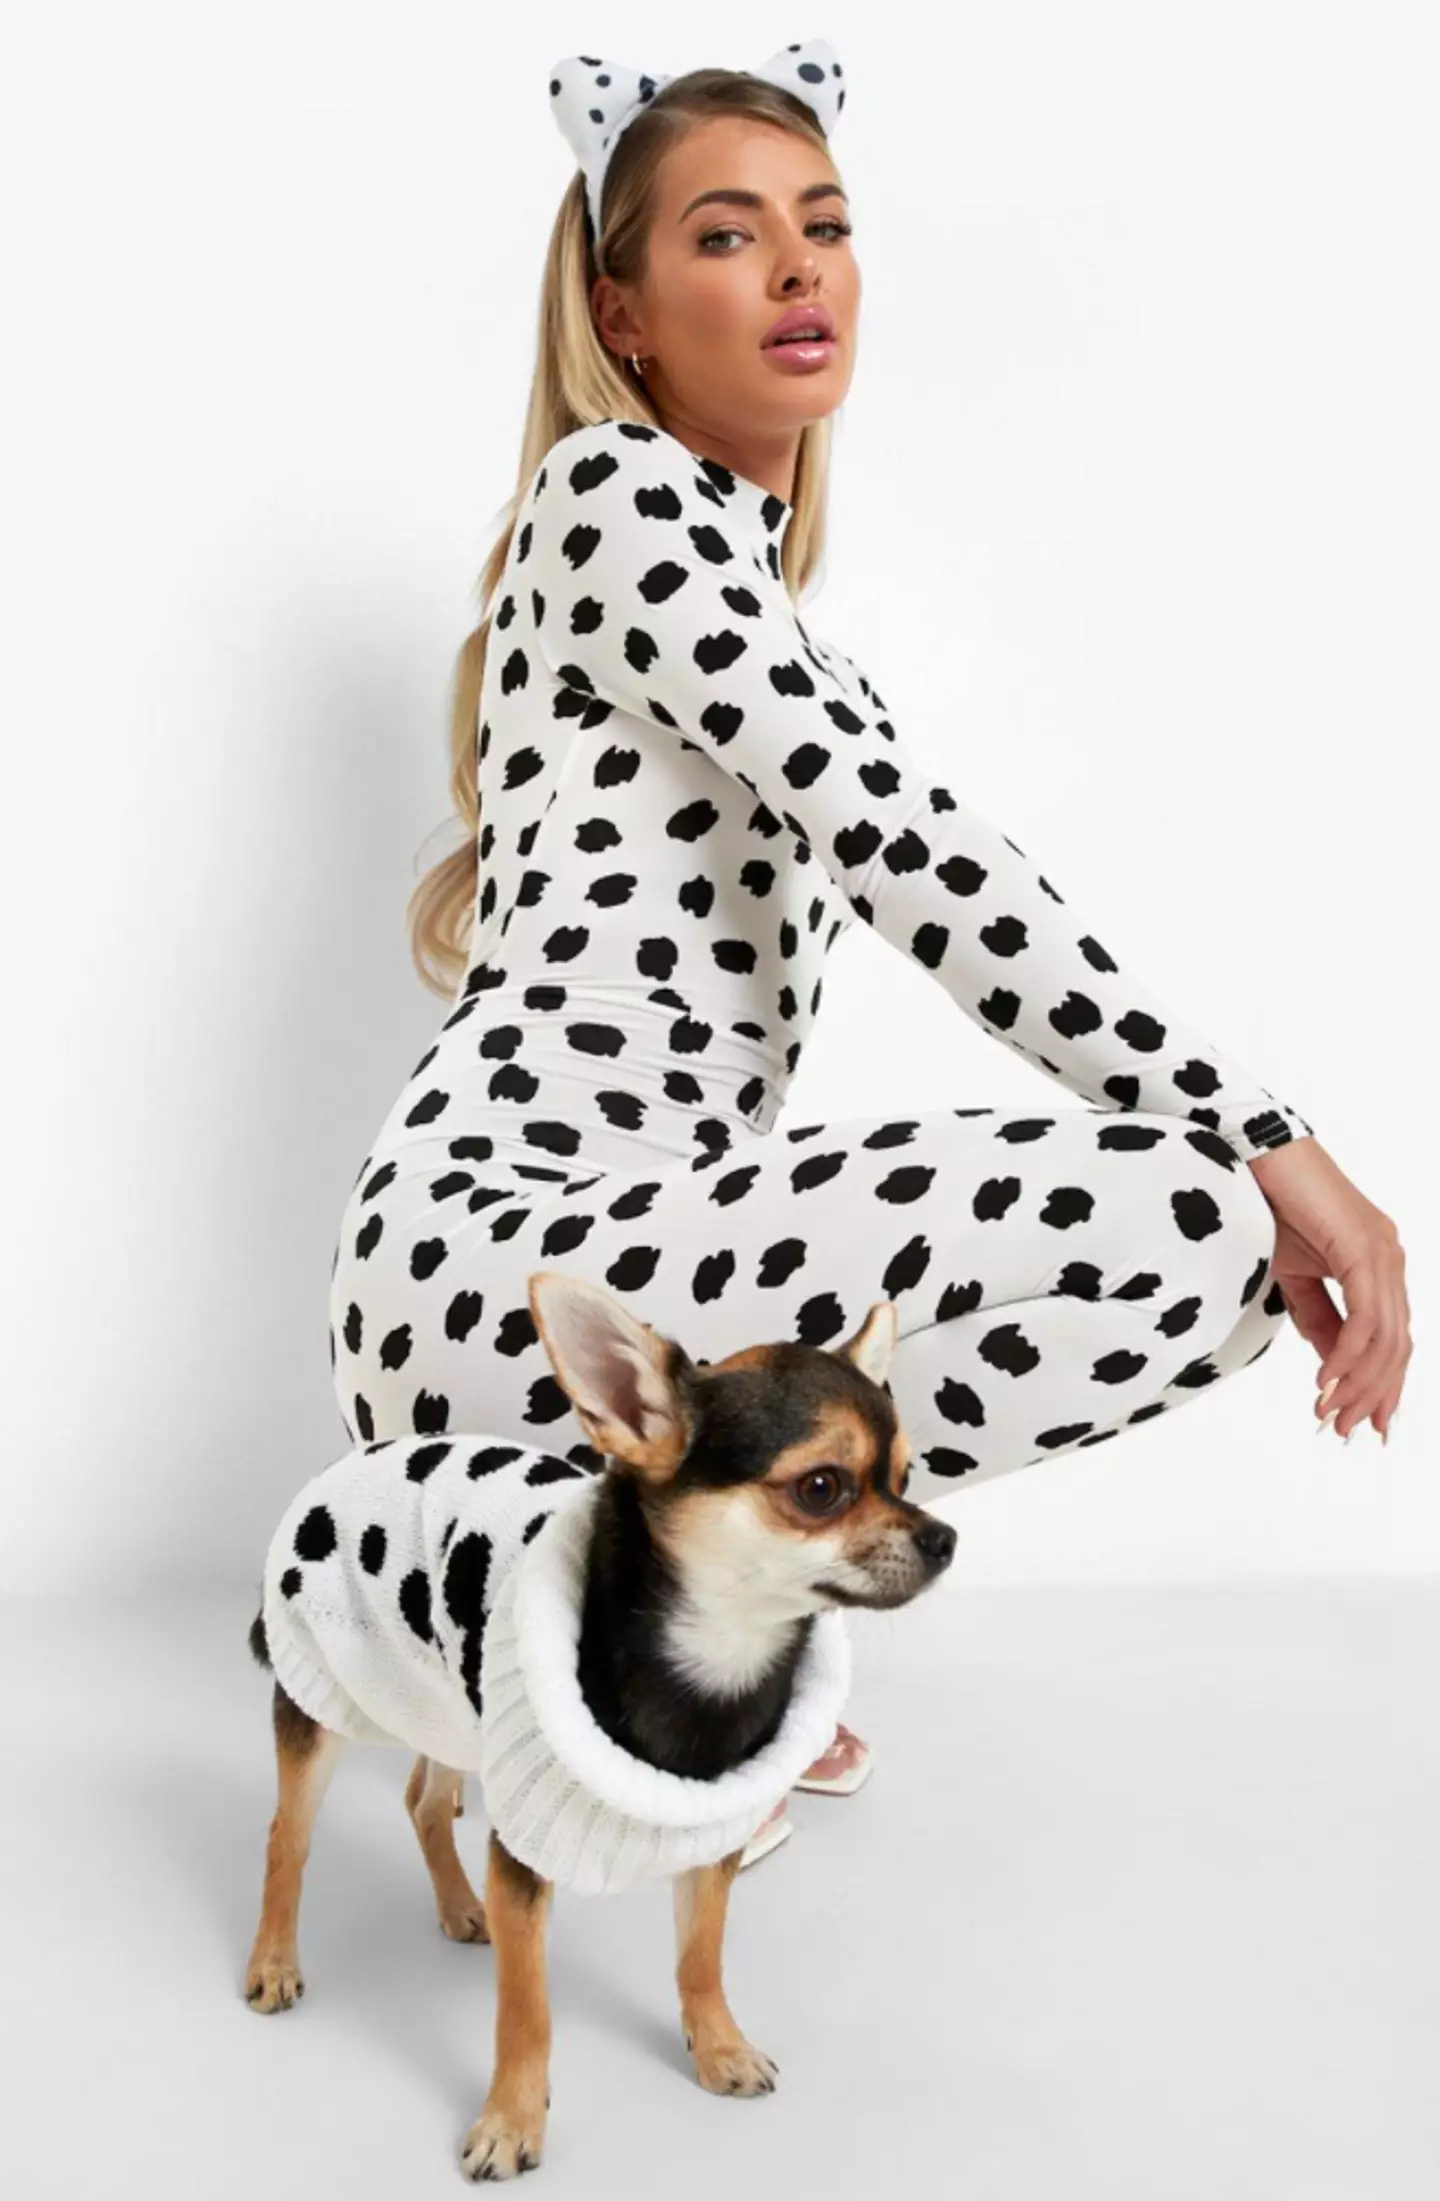 This outfit duo was inspired by 101 Dalmatians (